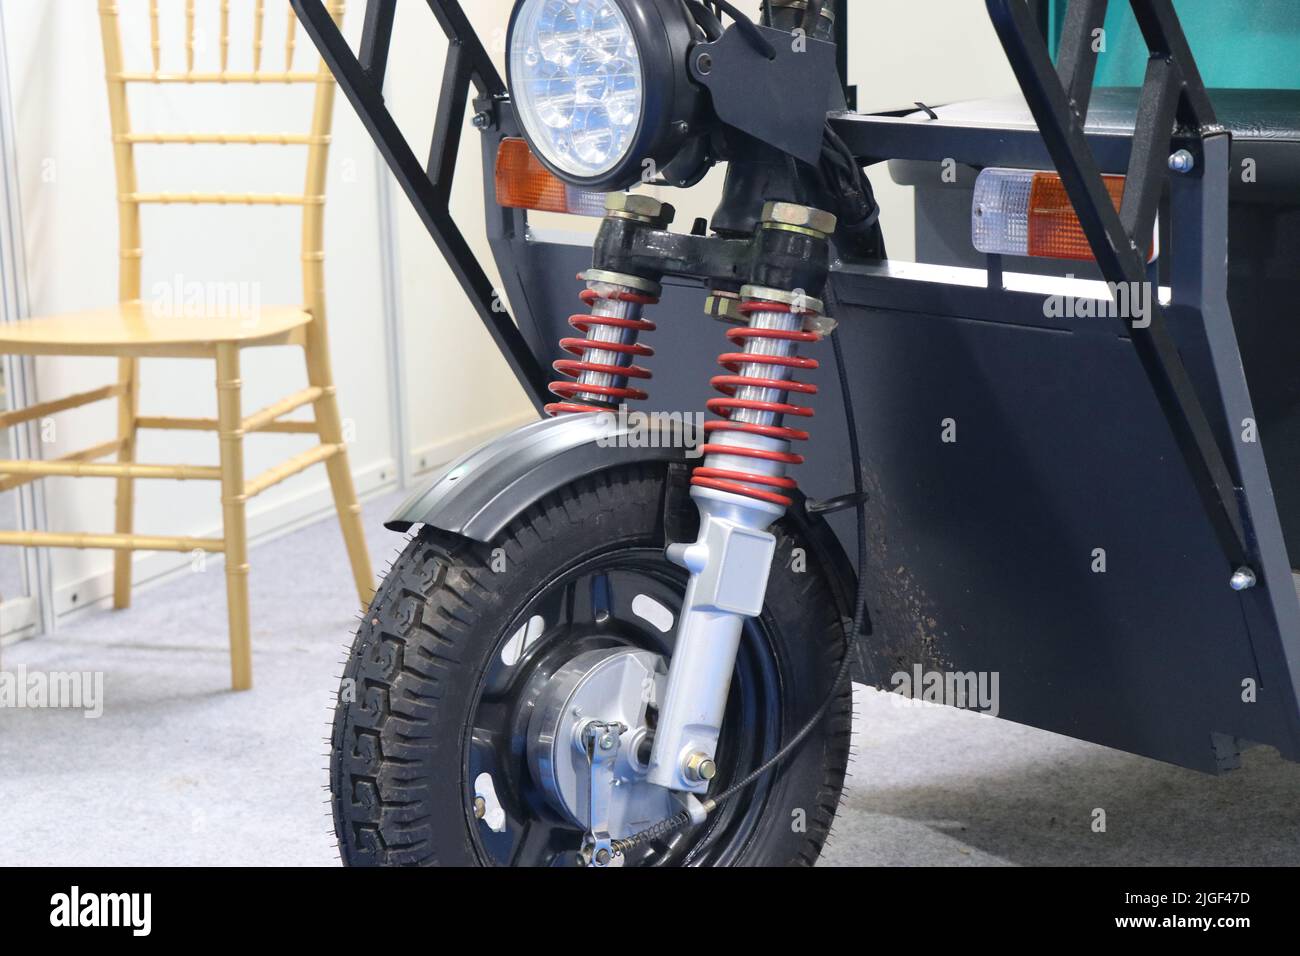 Front part of an electric tricycle with suspension springs and headlights view. Electric auto rickshaw or tuk tuk under manufacturing process Stock Photo